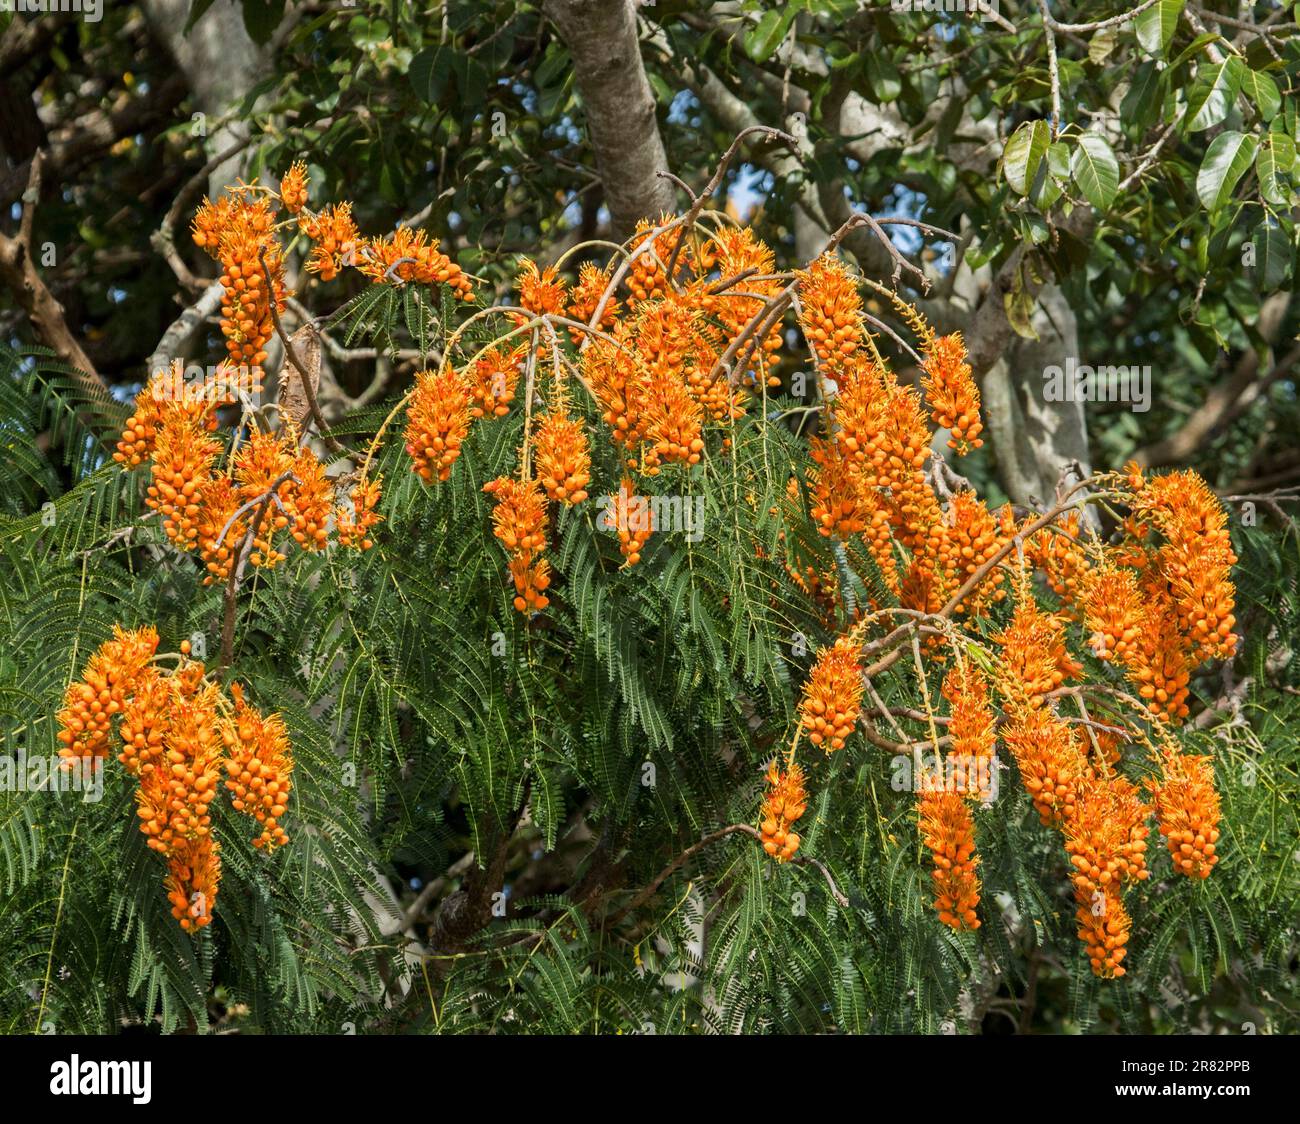 Long clusters of vivid orange flowers and dark green foliage of unusual tropical deciduous tree Colvillea racemosa, Colville's glory, in Australia Stock Photo